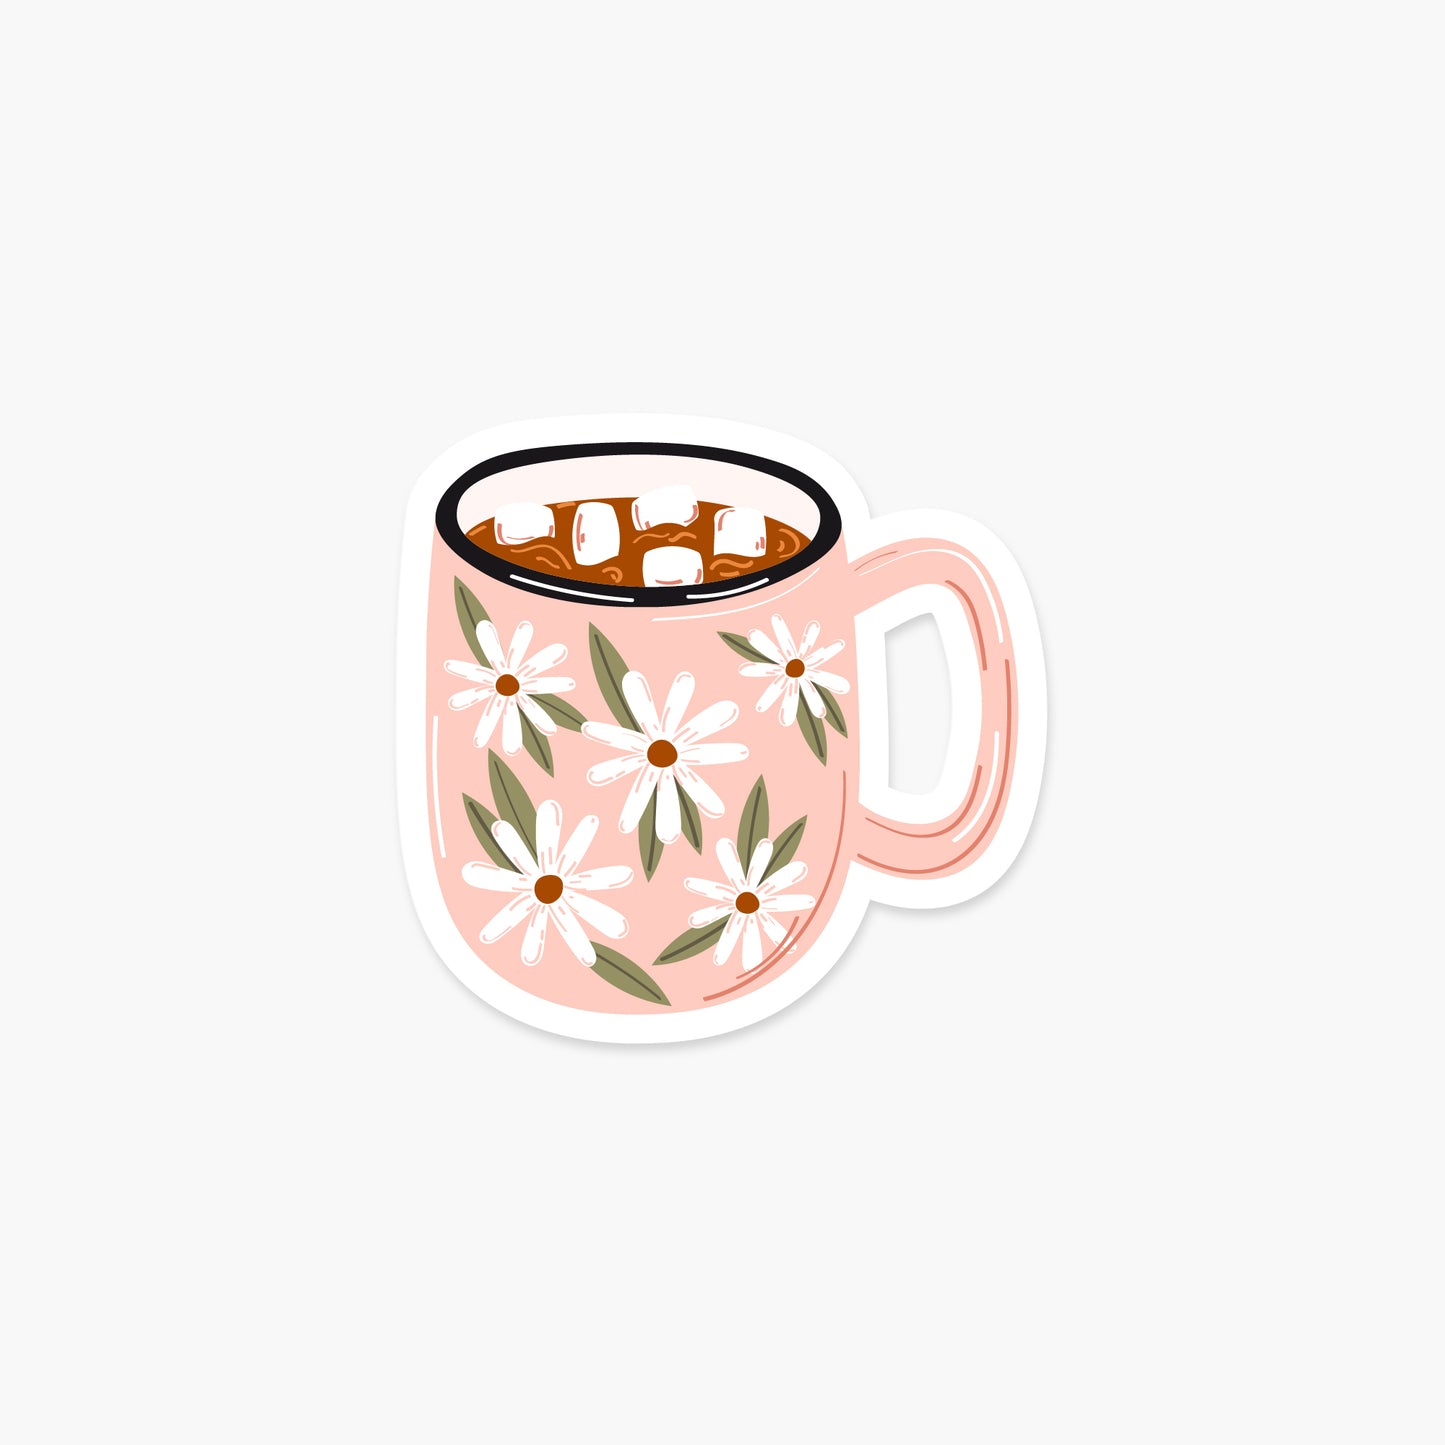 Hot chocolate in a pink mug - Food Sticker | Footnotes Paper